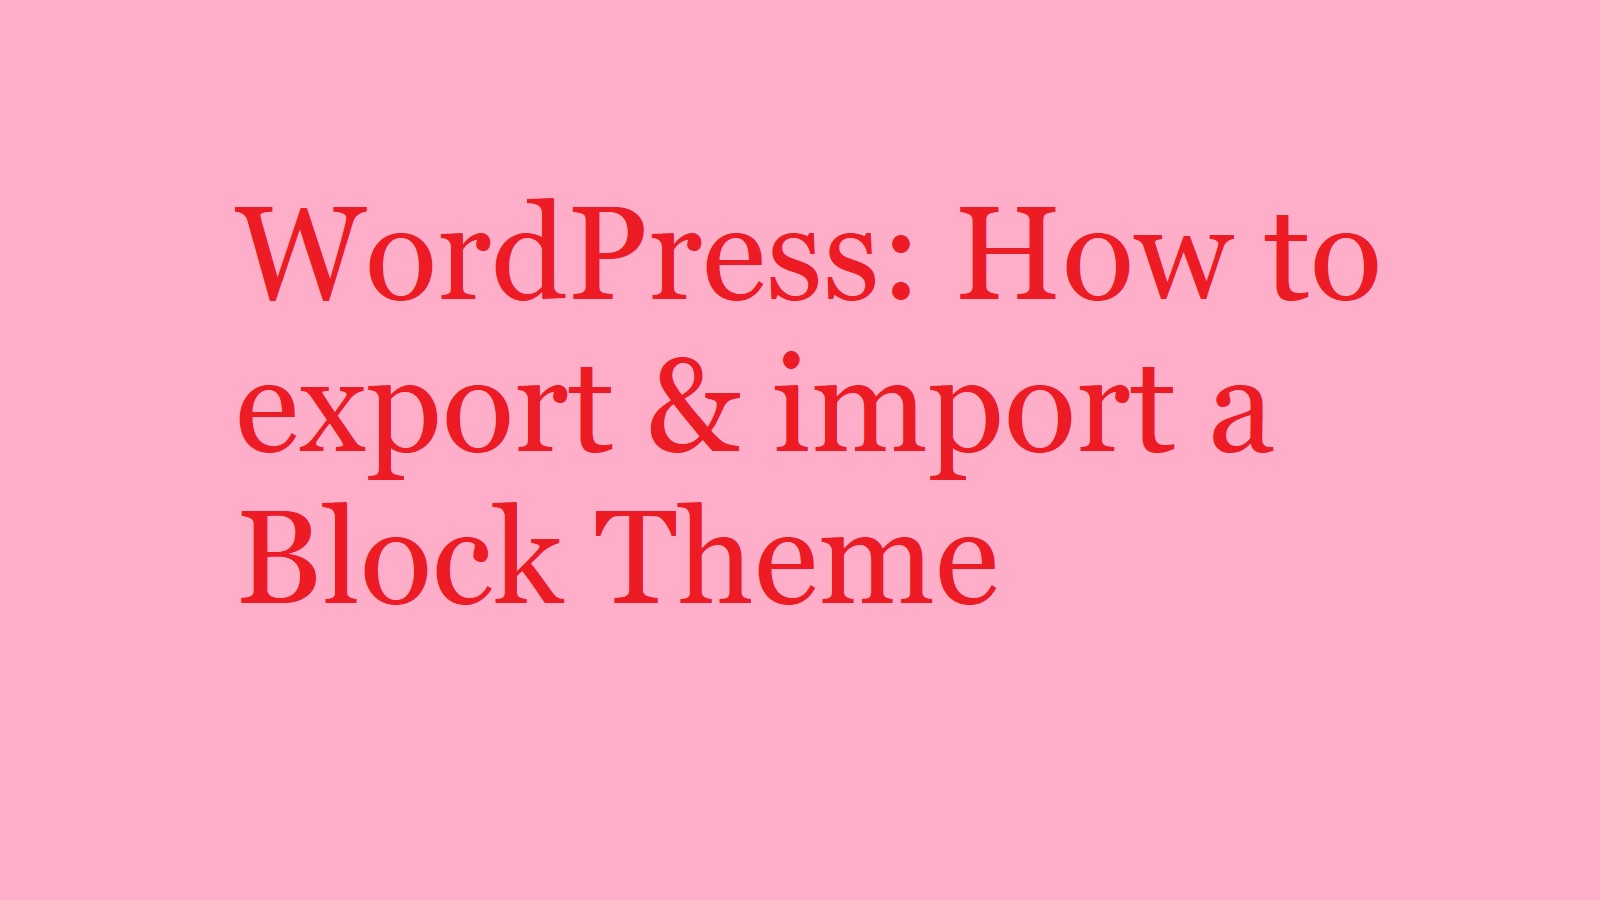 WordPress: How to export & import a Block Theme